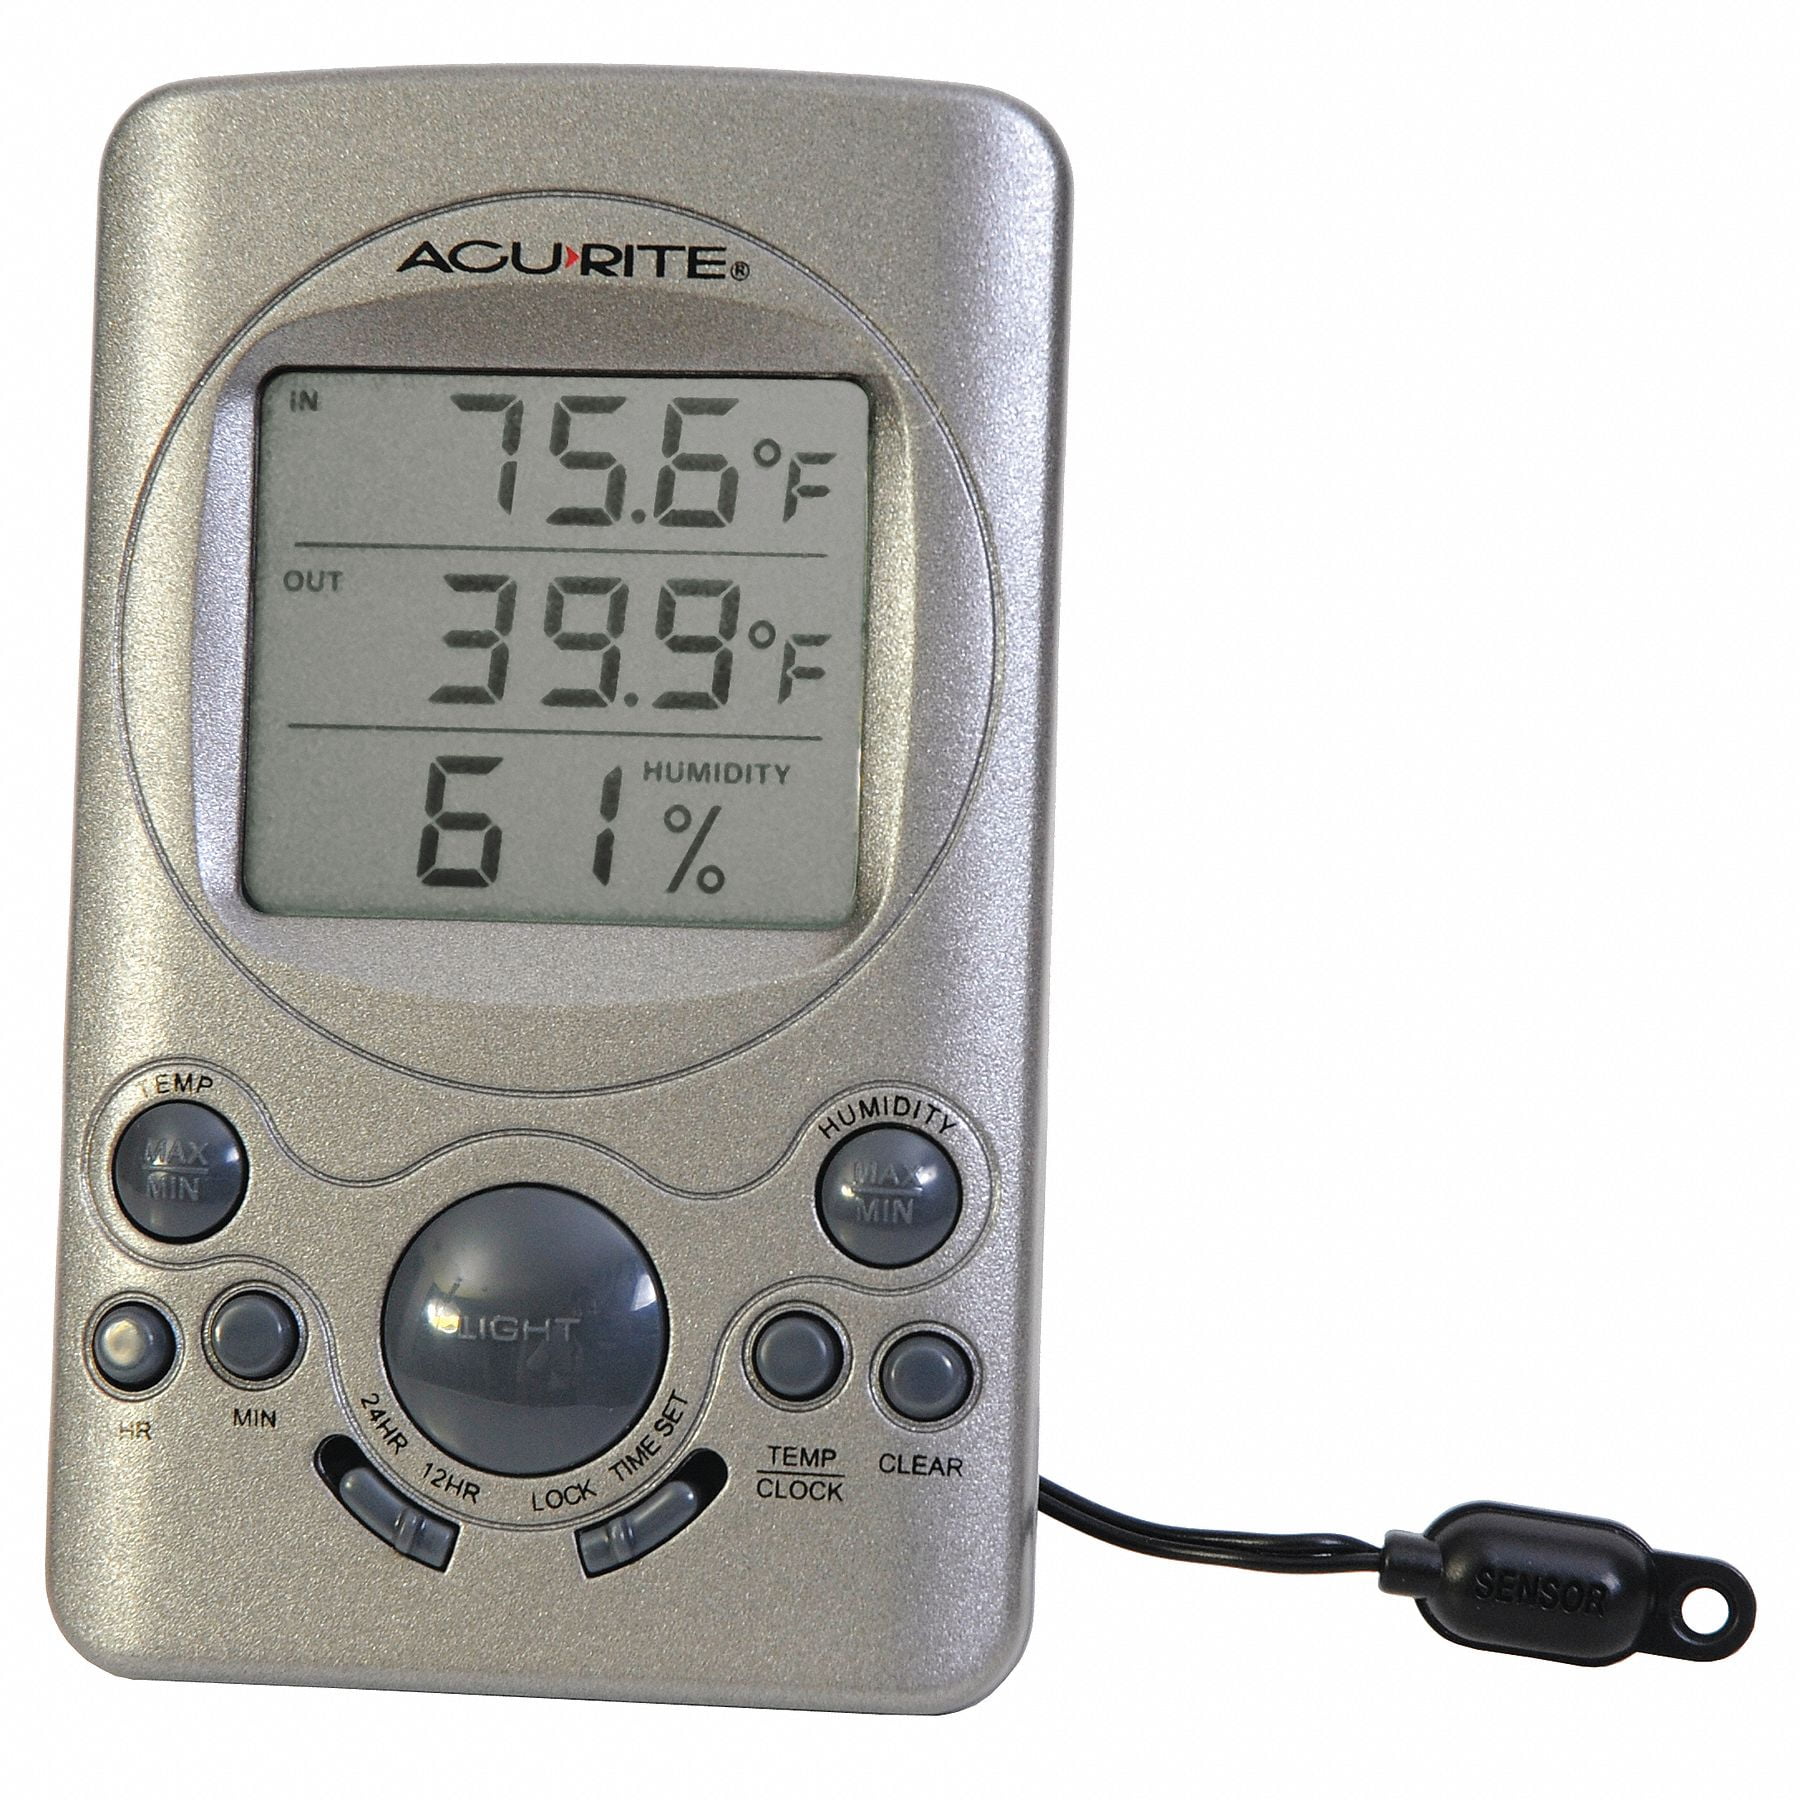 Acurite 2-3/4 W x 3-1/8 H Plastic Digital Indoor & Outdoor Thermometer -  Town Hardware & General Store